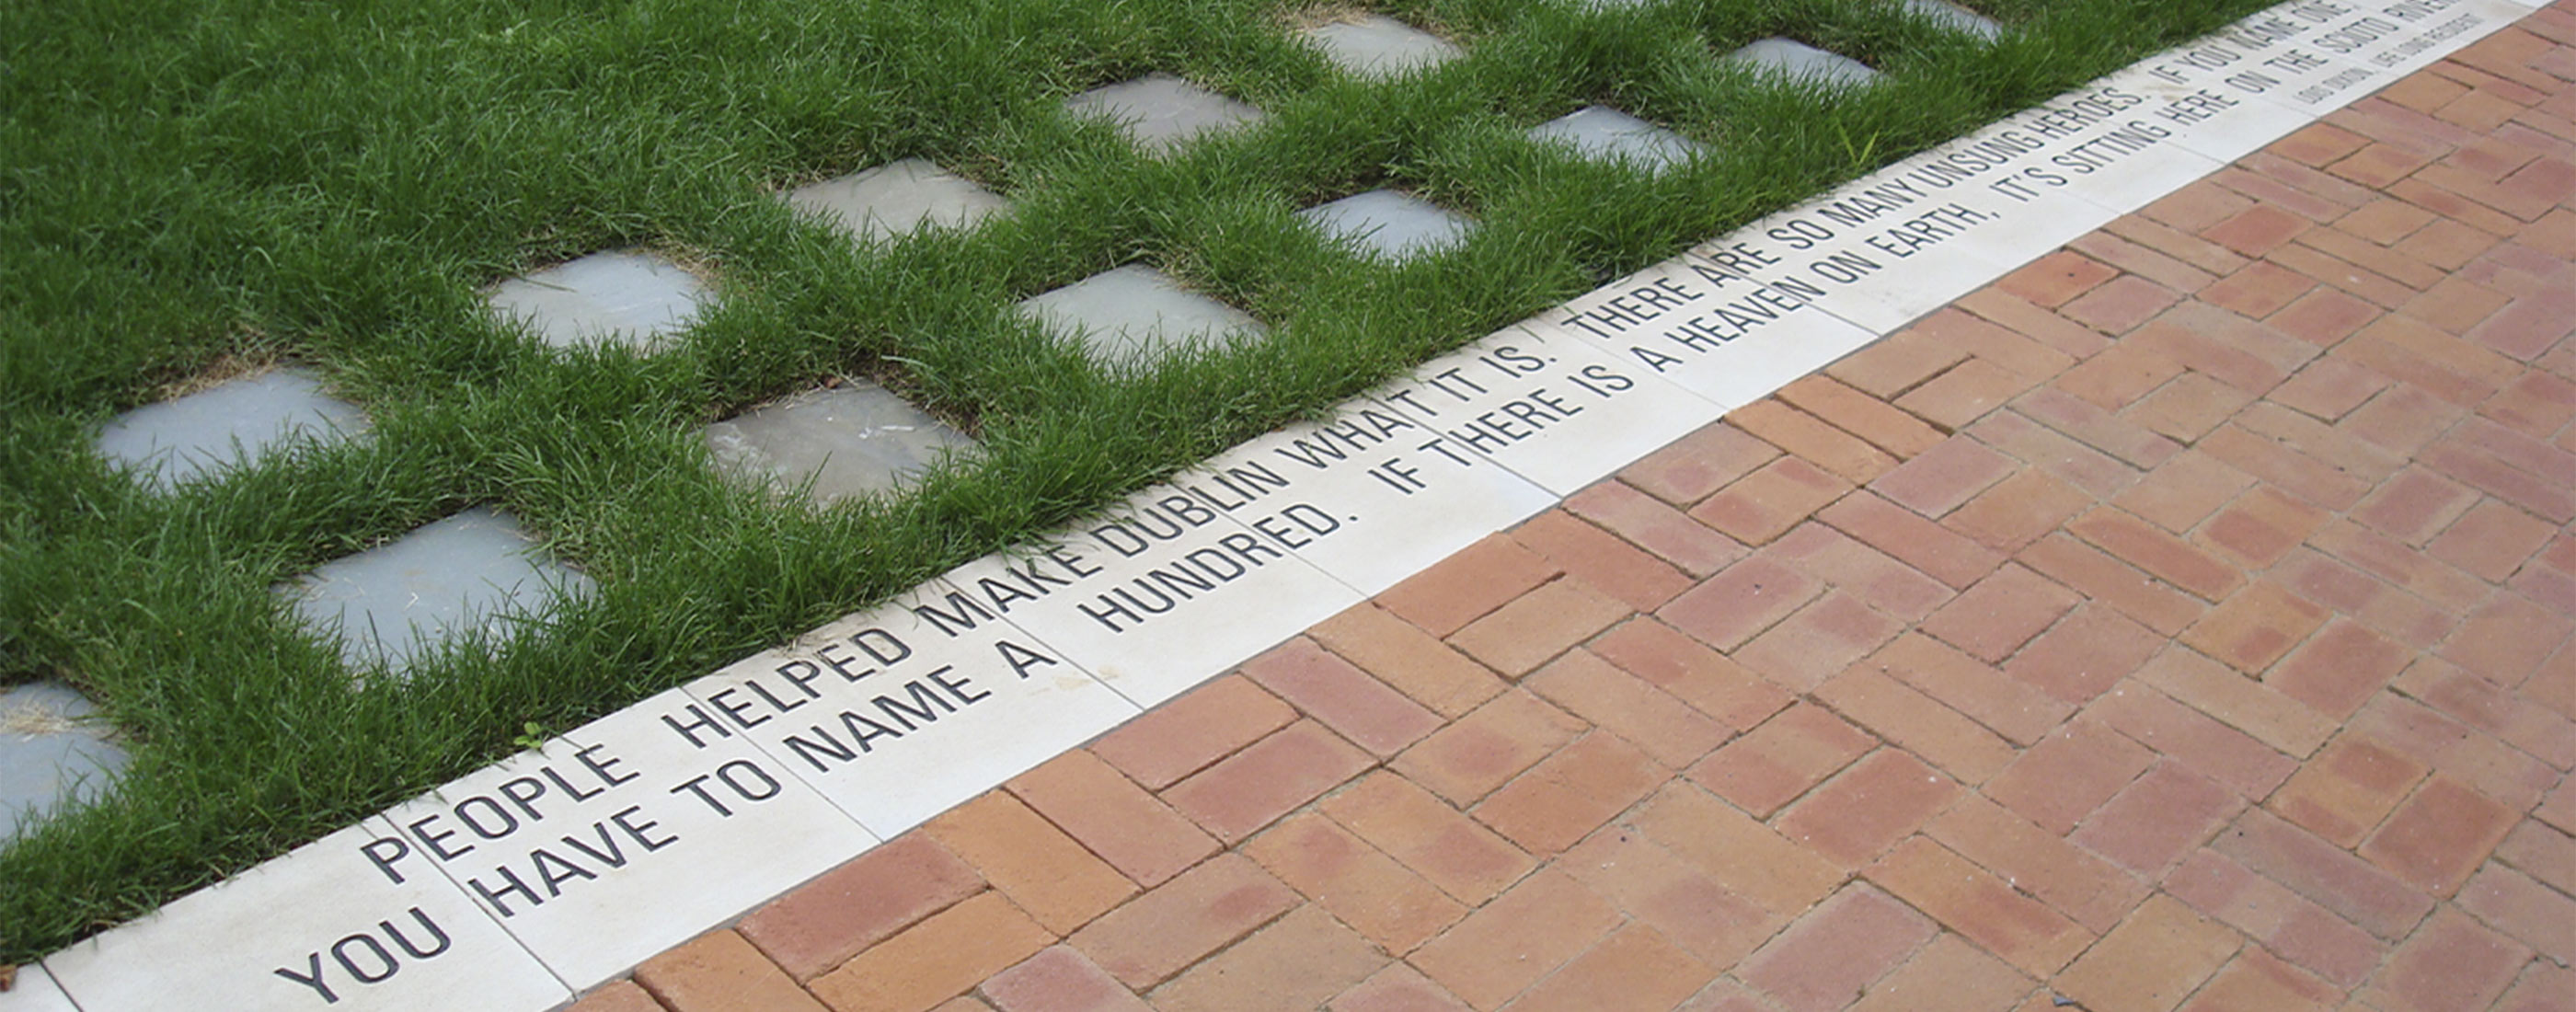 Life long resident quote stamped in BriHi Square's town center.